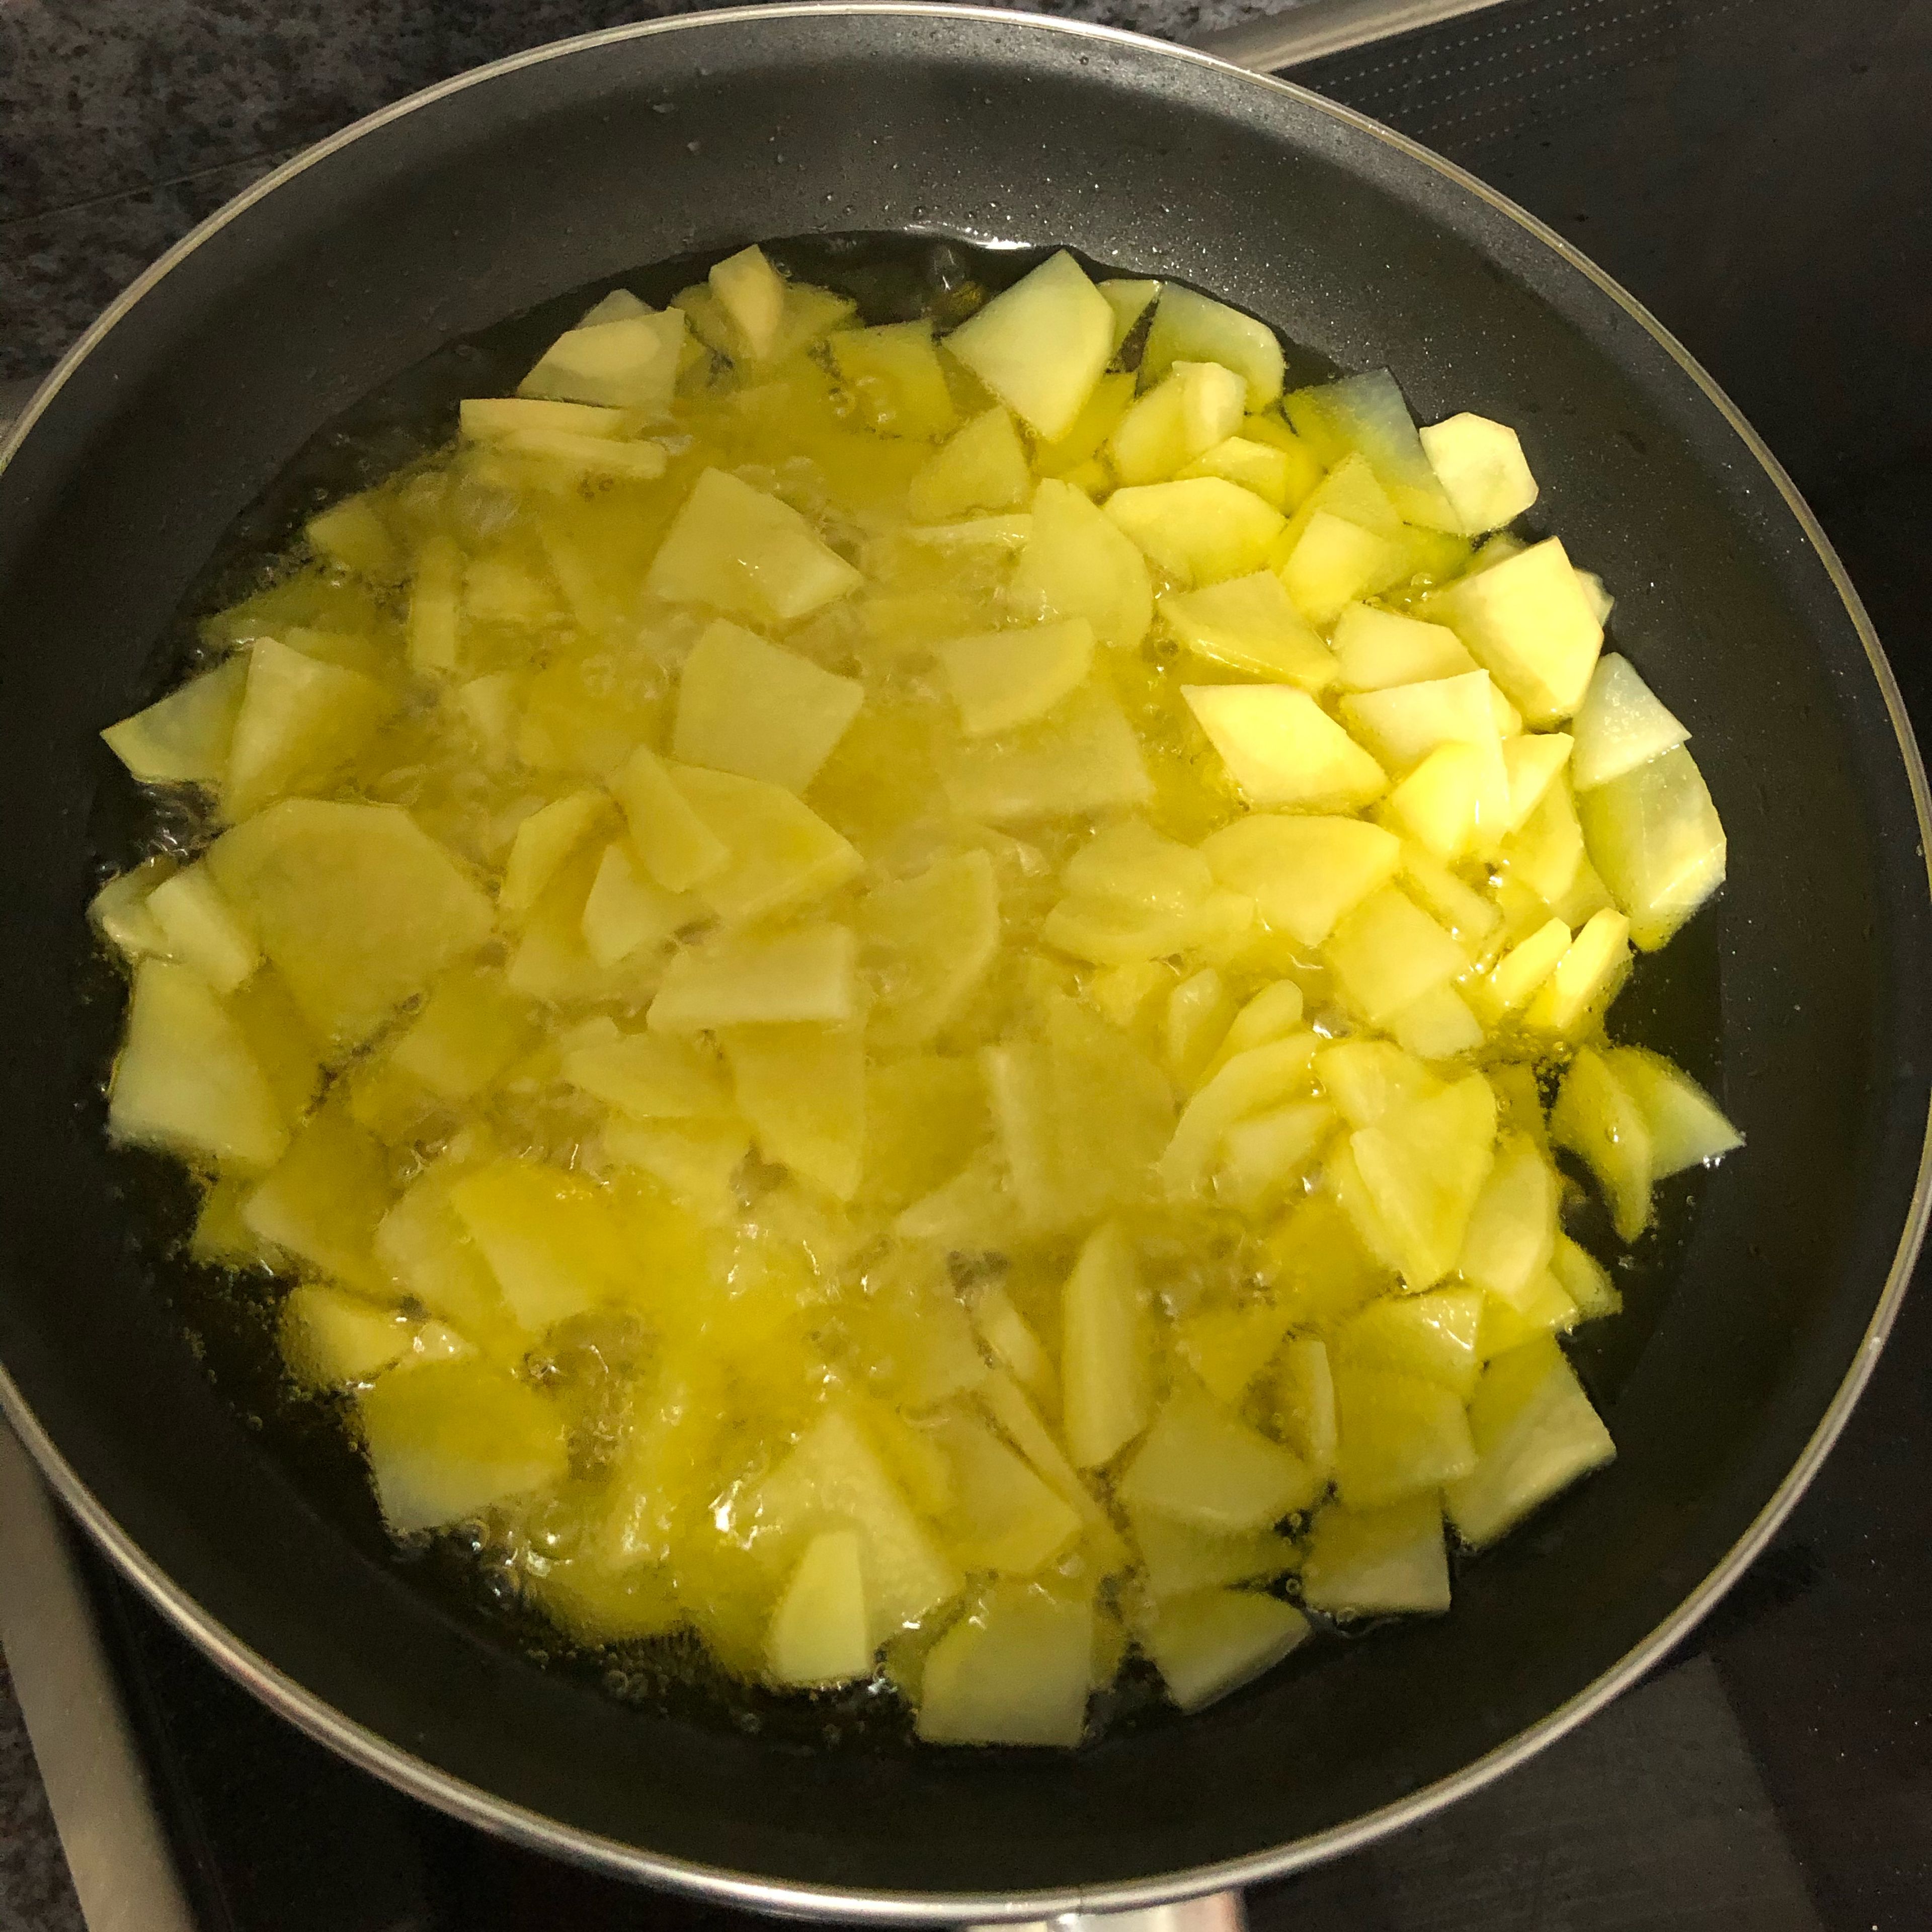 In abundant oil, let the potatoes cook on medium heat for about 20 minutes. Add a bit of salt. You want the oil to cover the potatoes. Every 5 minutes, stir the potatoes to make sure that all the slices are cooked.